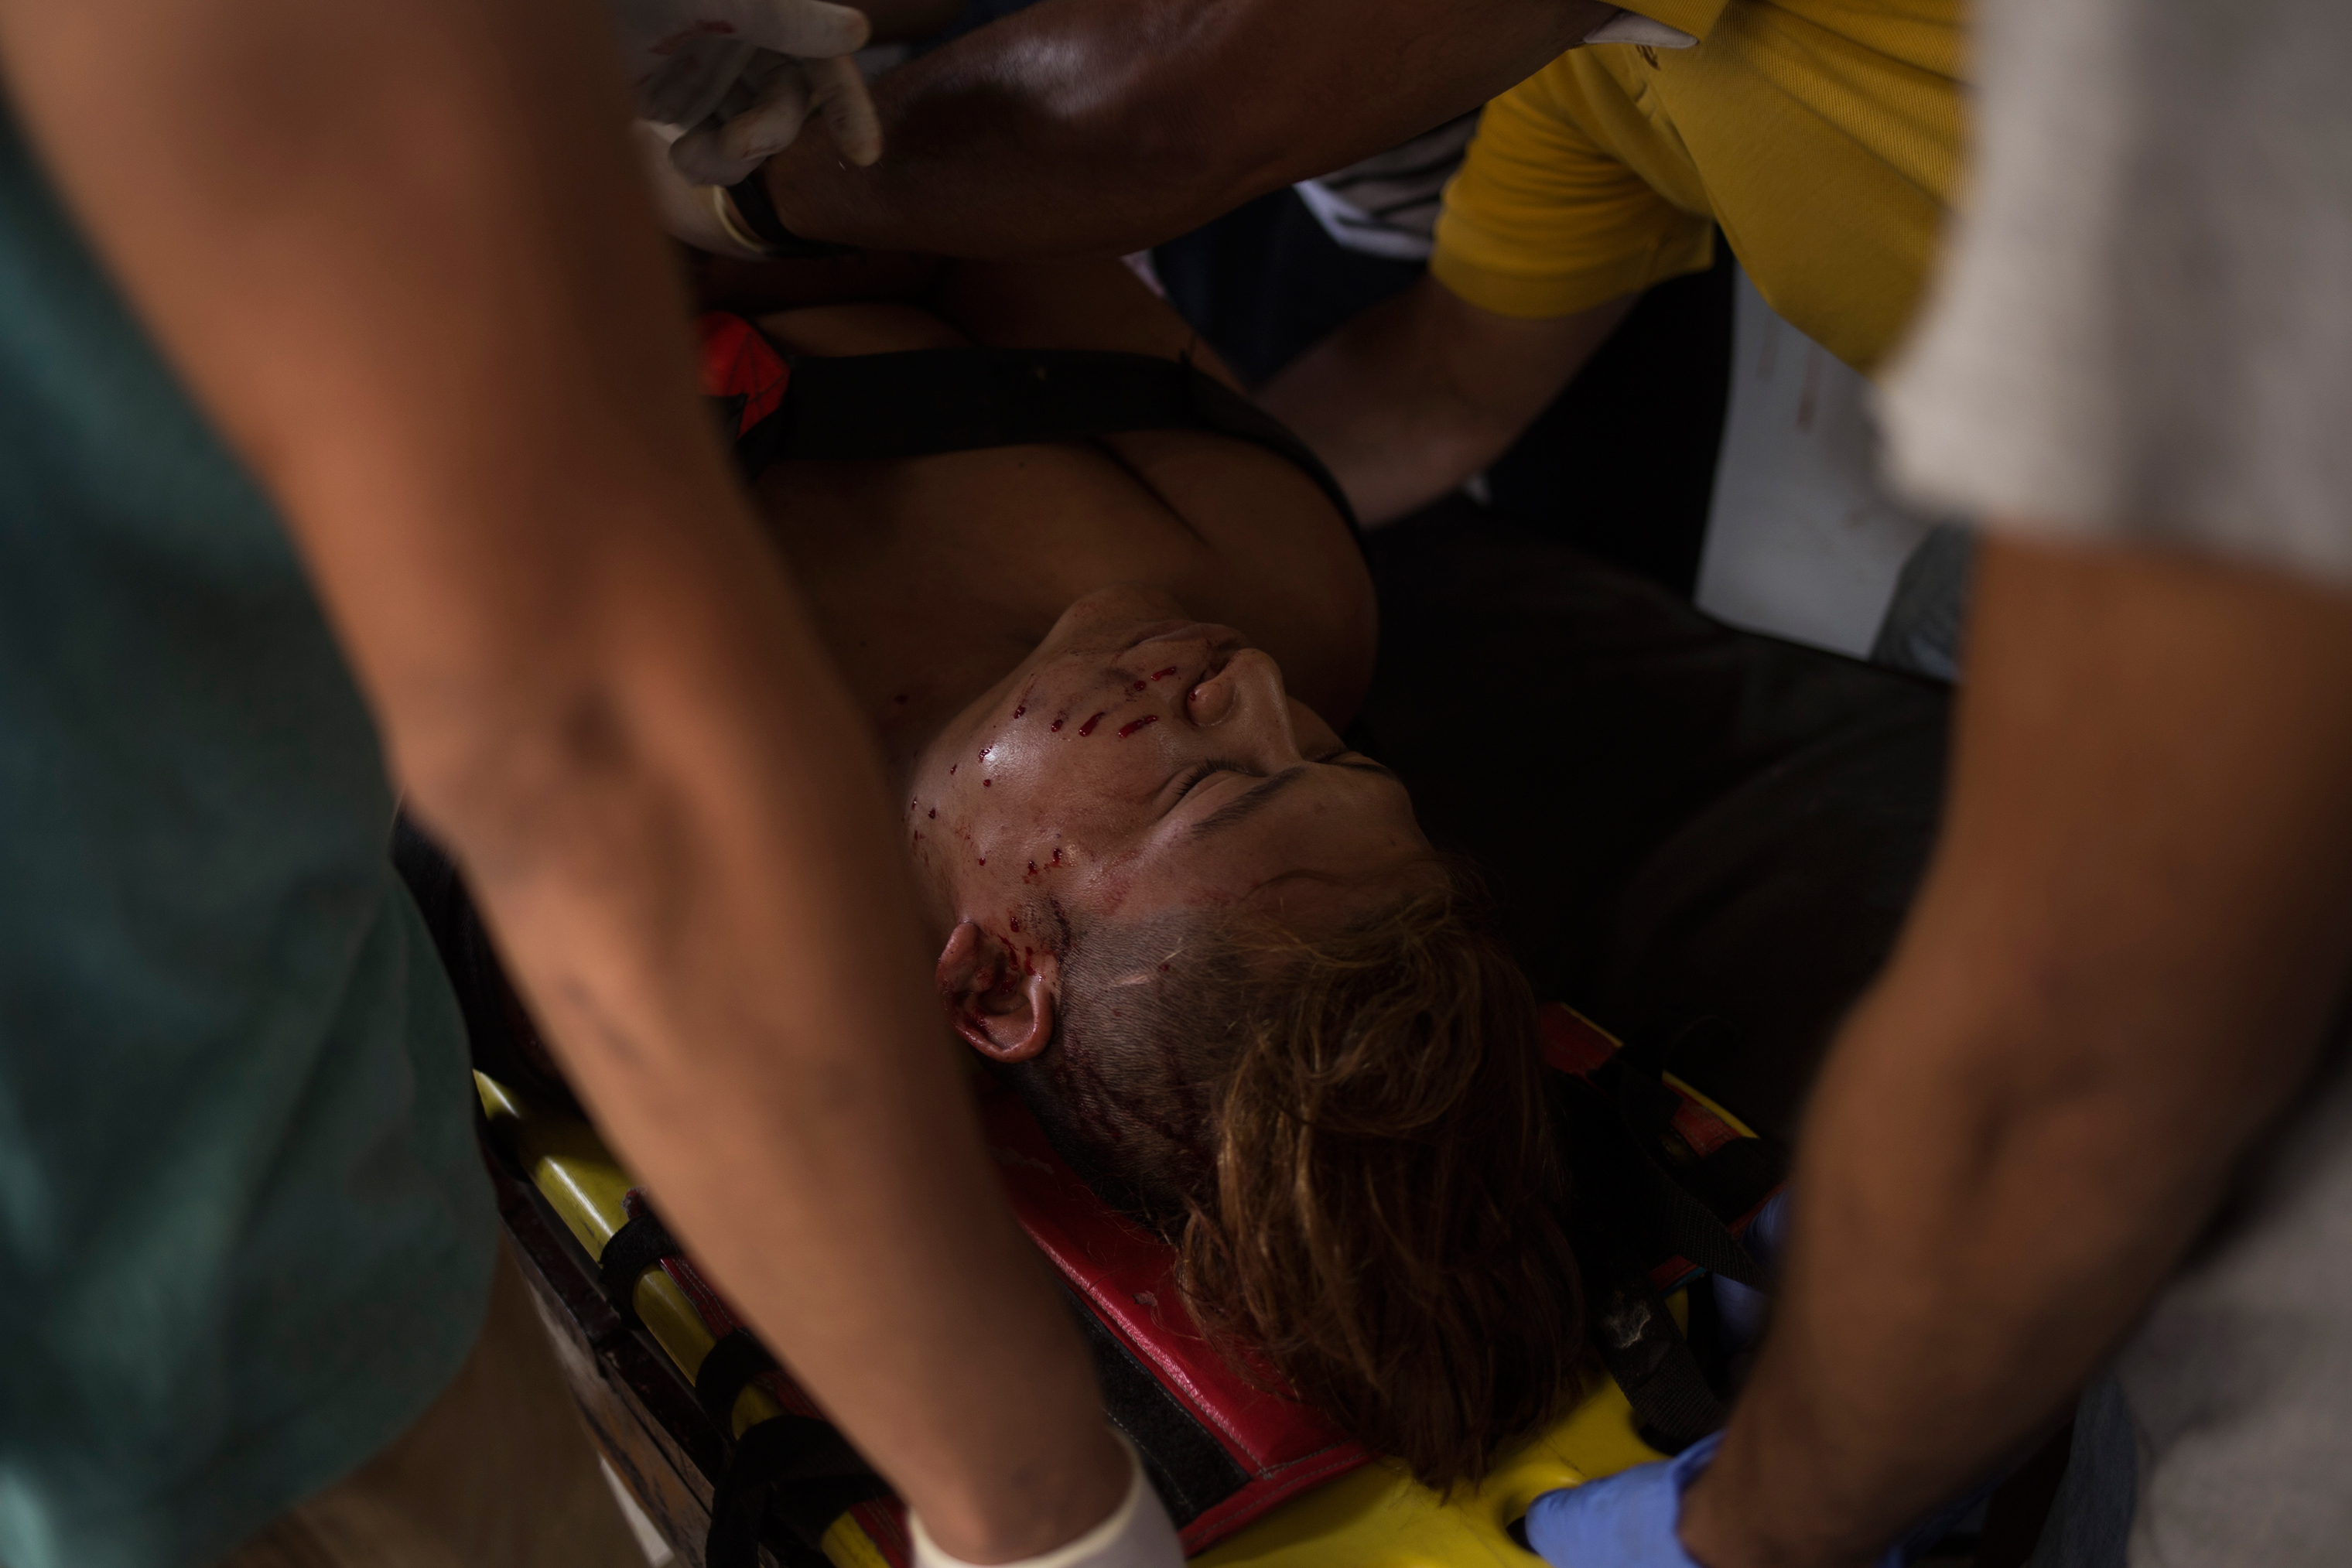 A demonstrator who was injured during a clash with police in Masaya on June 2. (Víctor Peña—El Faro)